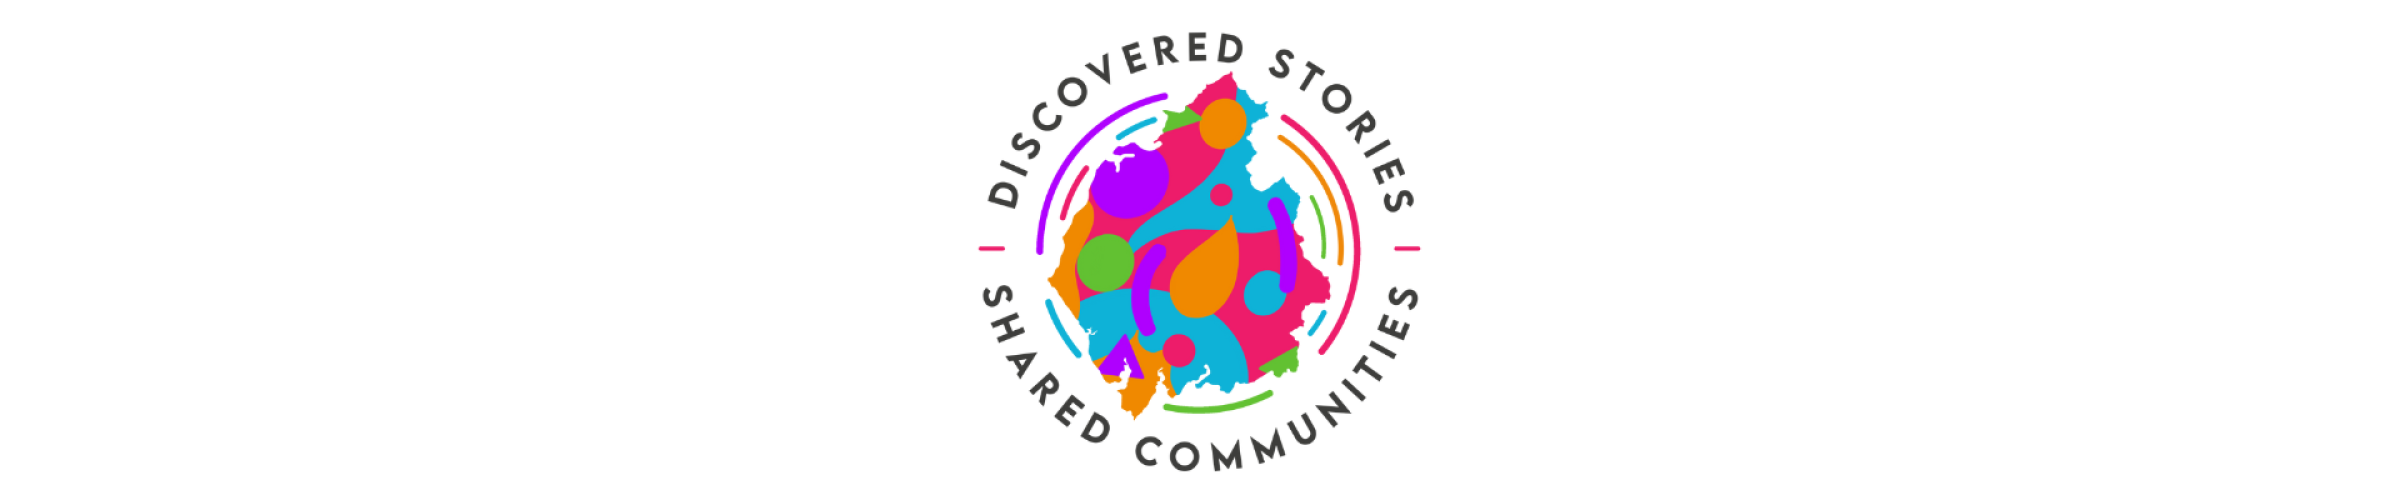 Discovered Stories Shared Communities